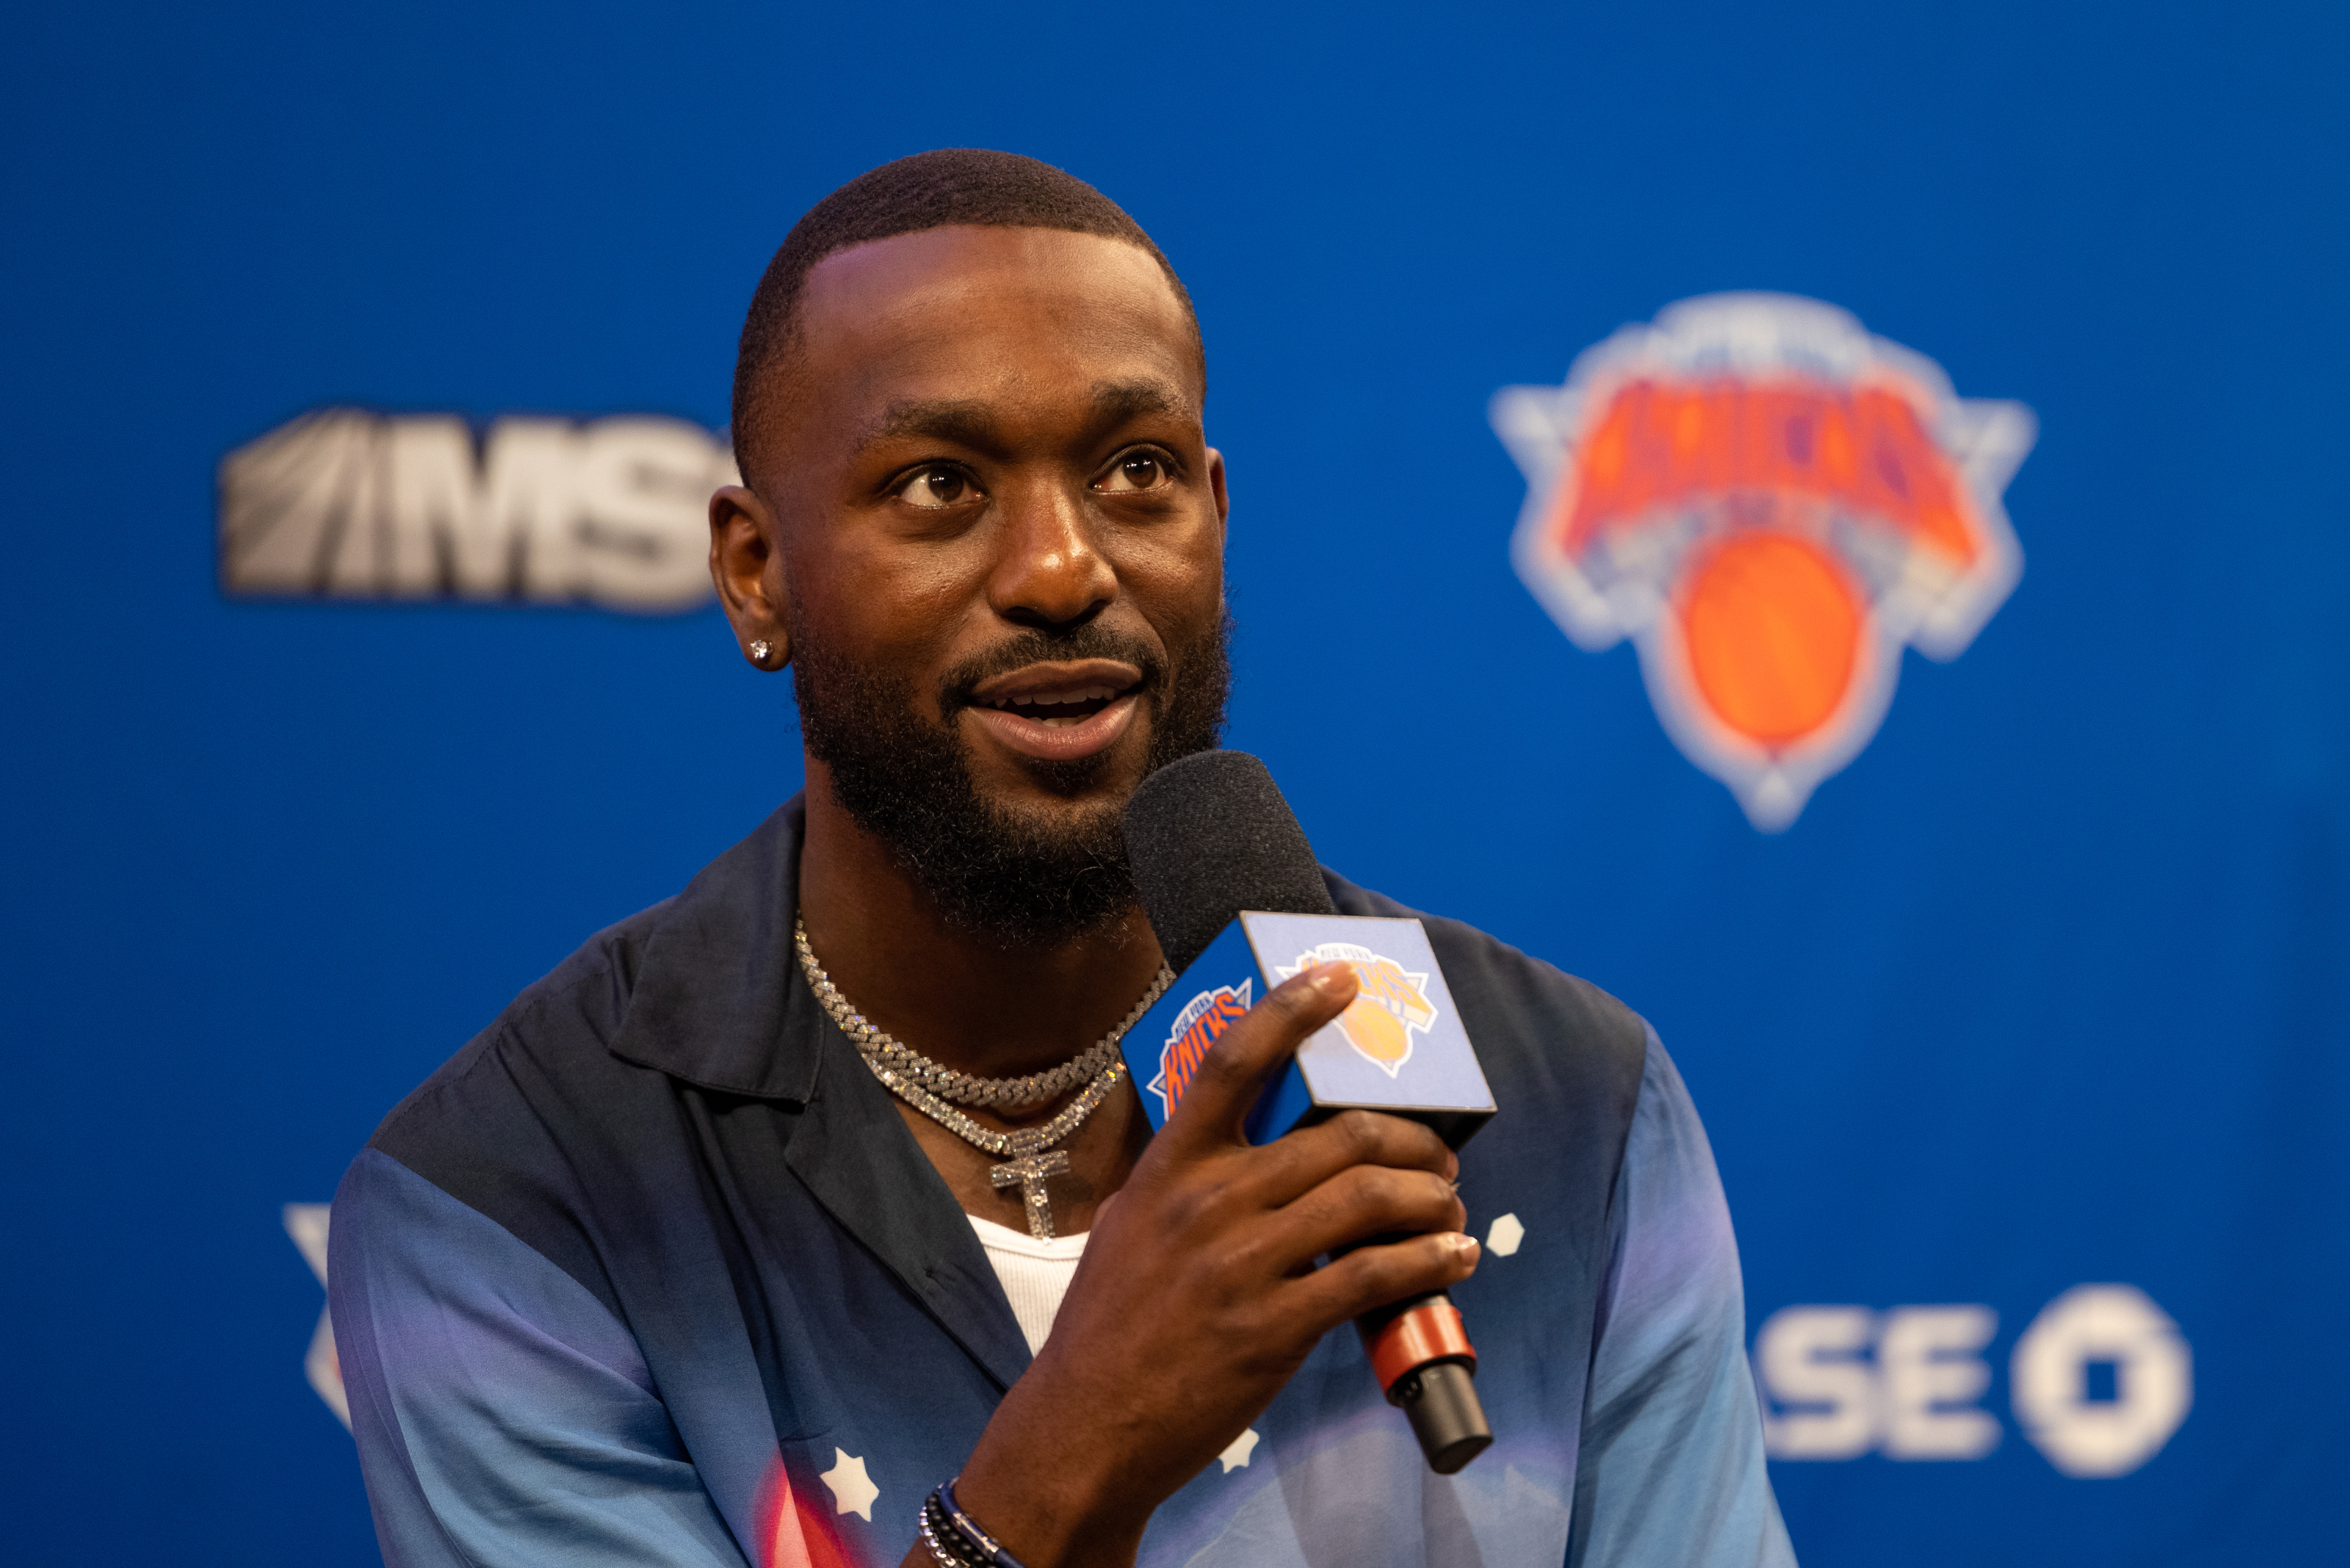 Kemba Walker on why his Knicks tenure was 'everything I dreamed of'  National News - Bally Sports